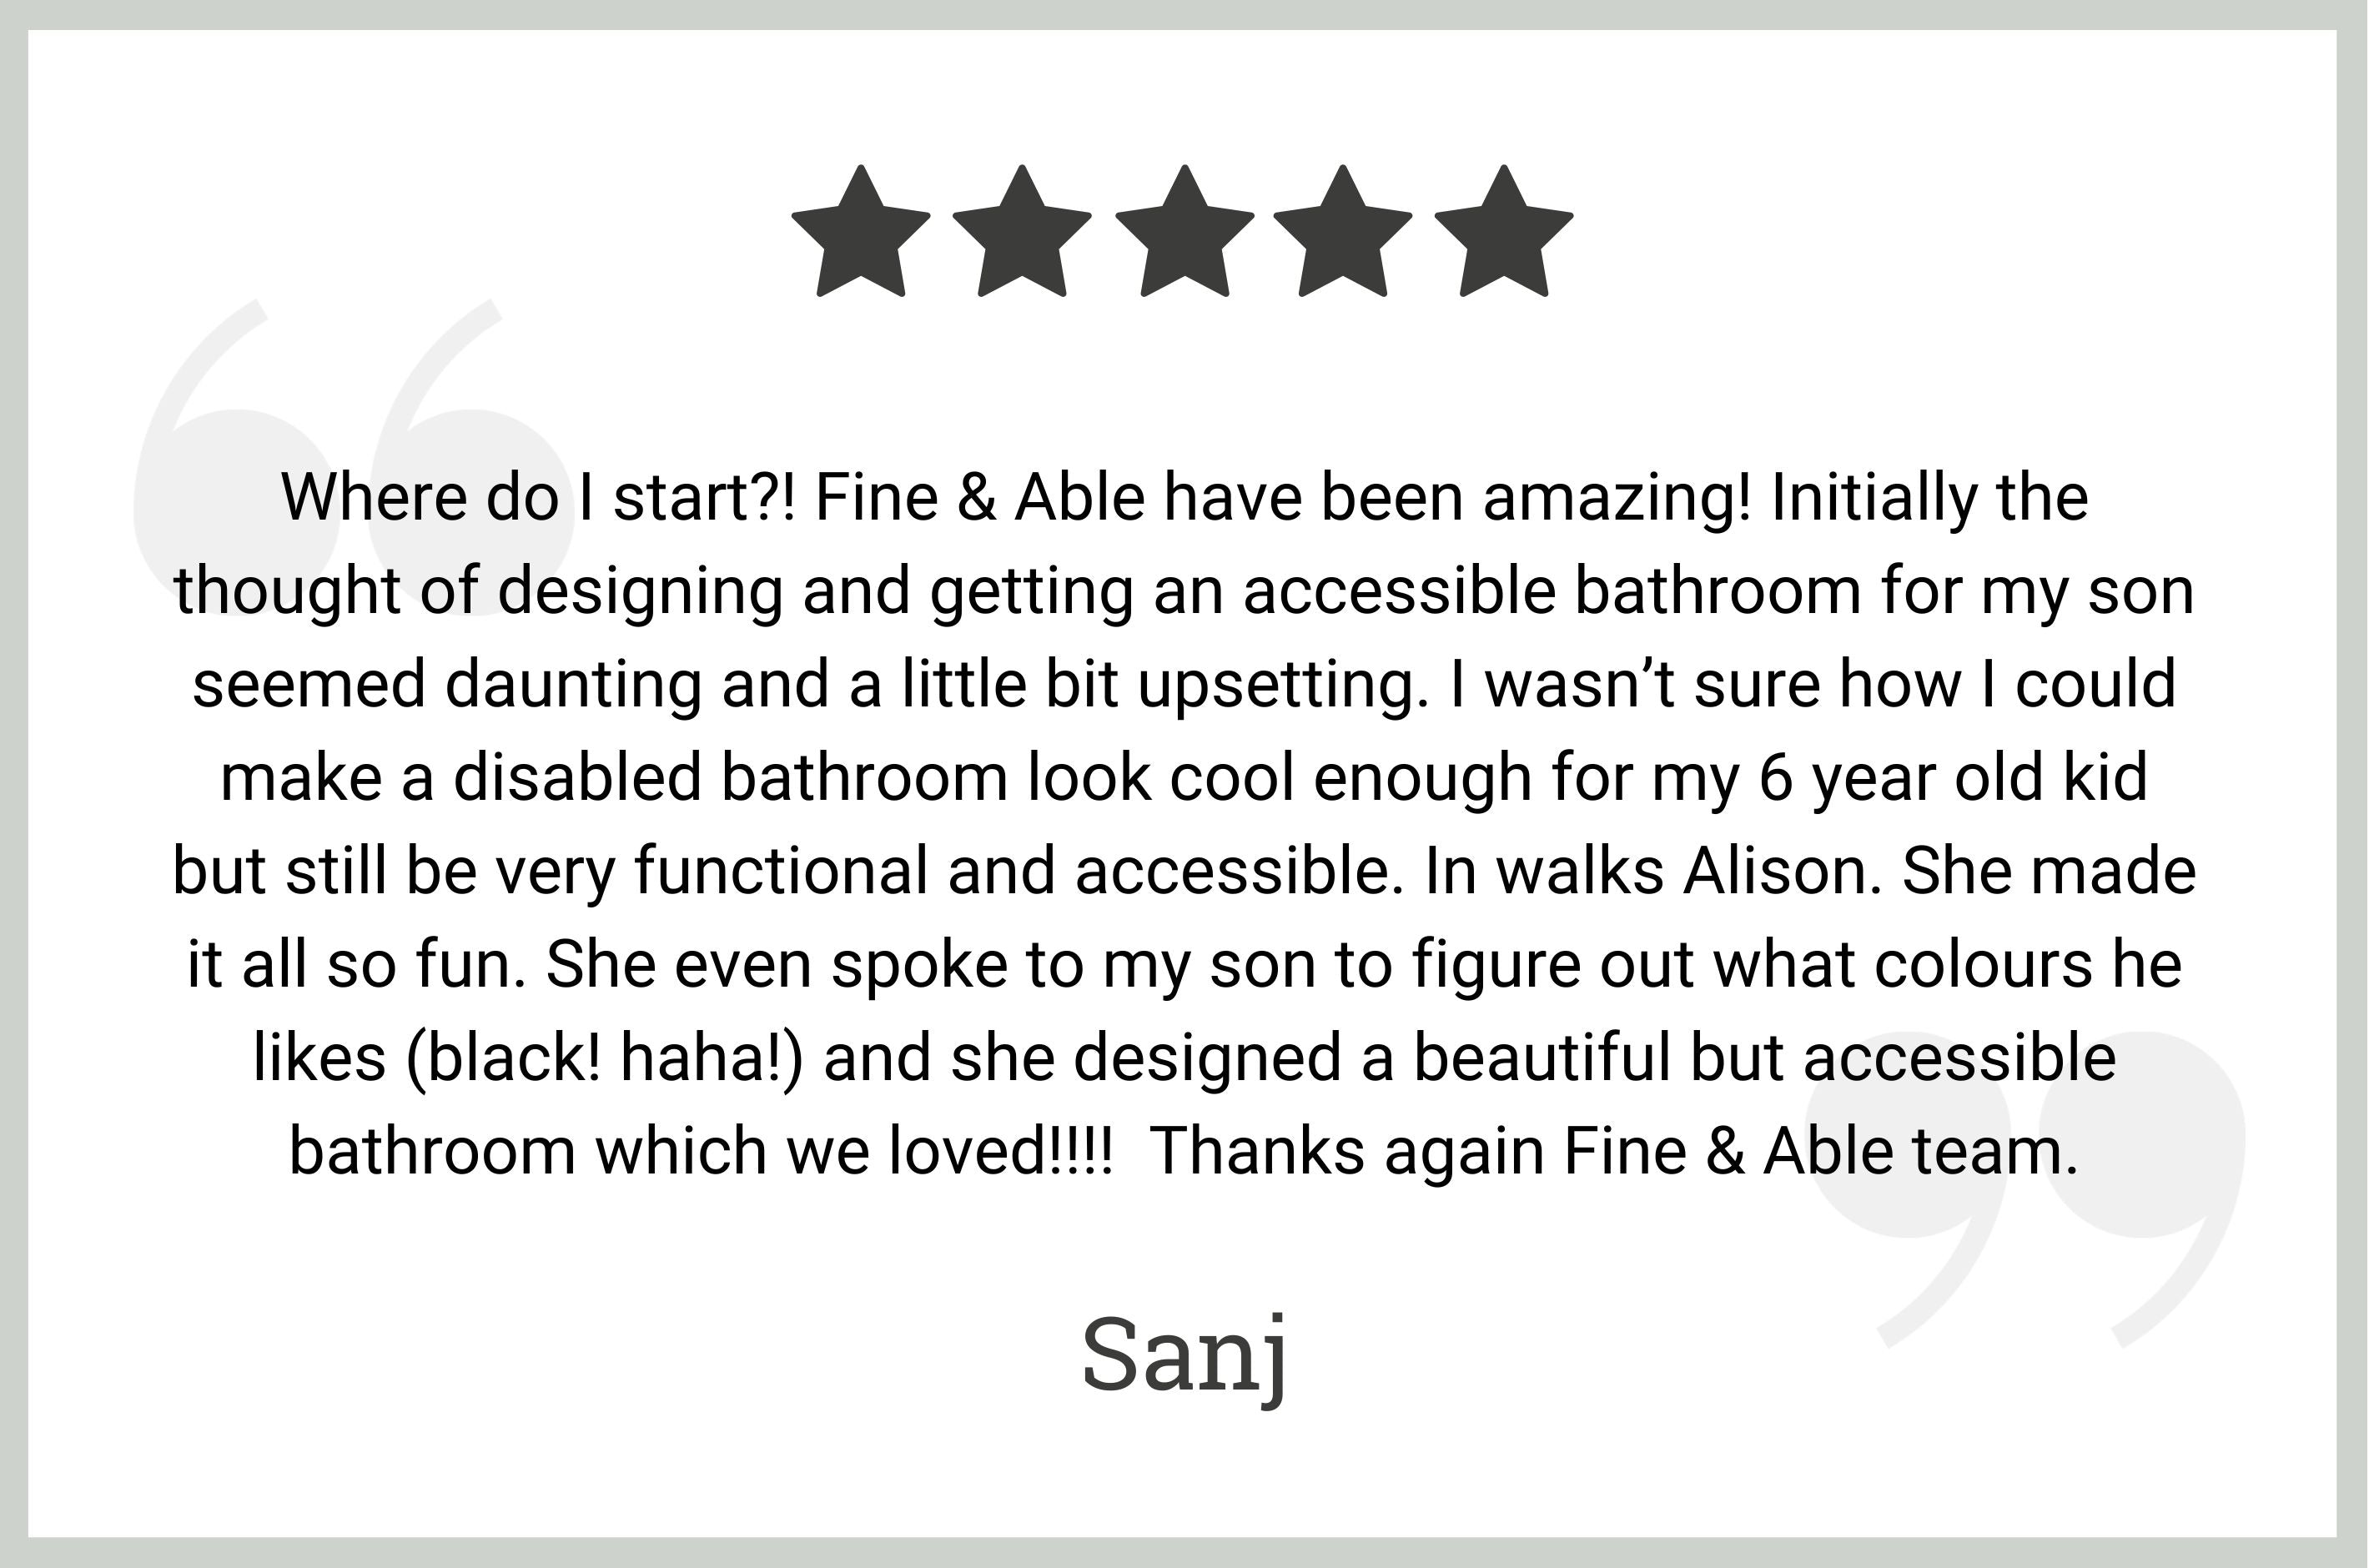 5 star review by Sanj